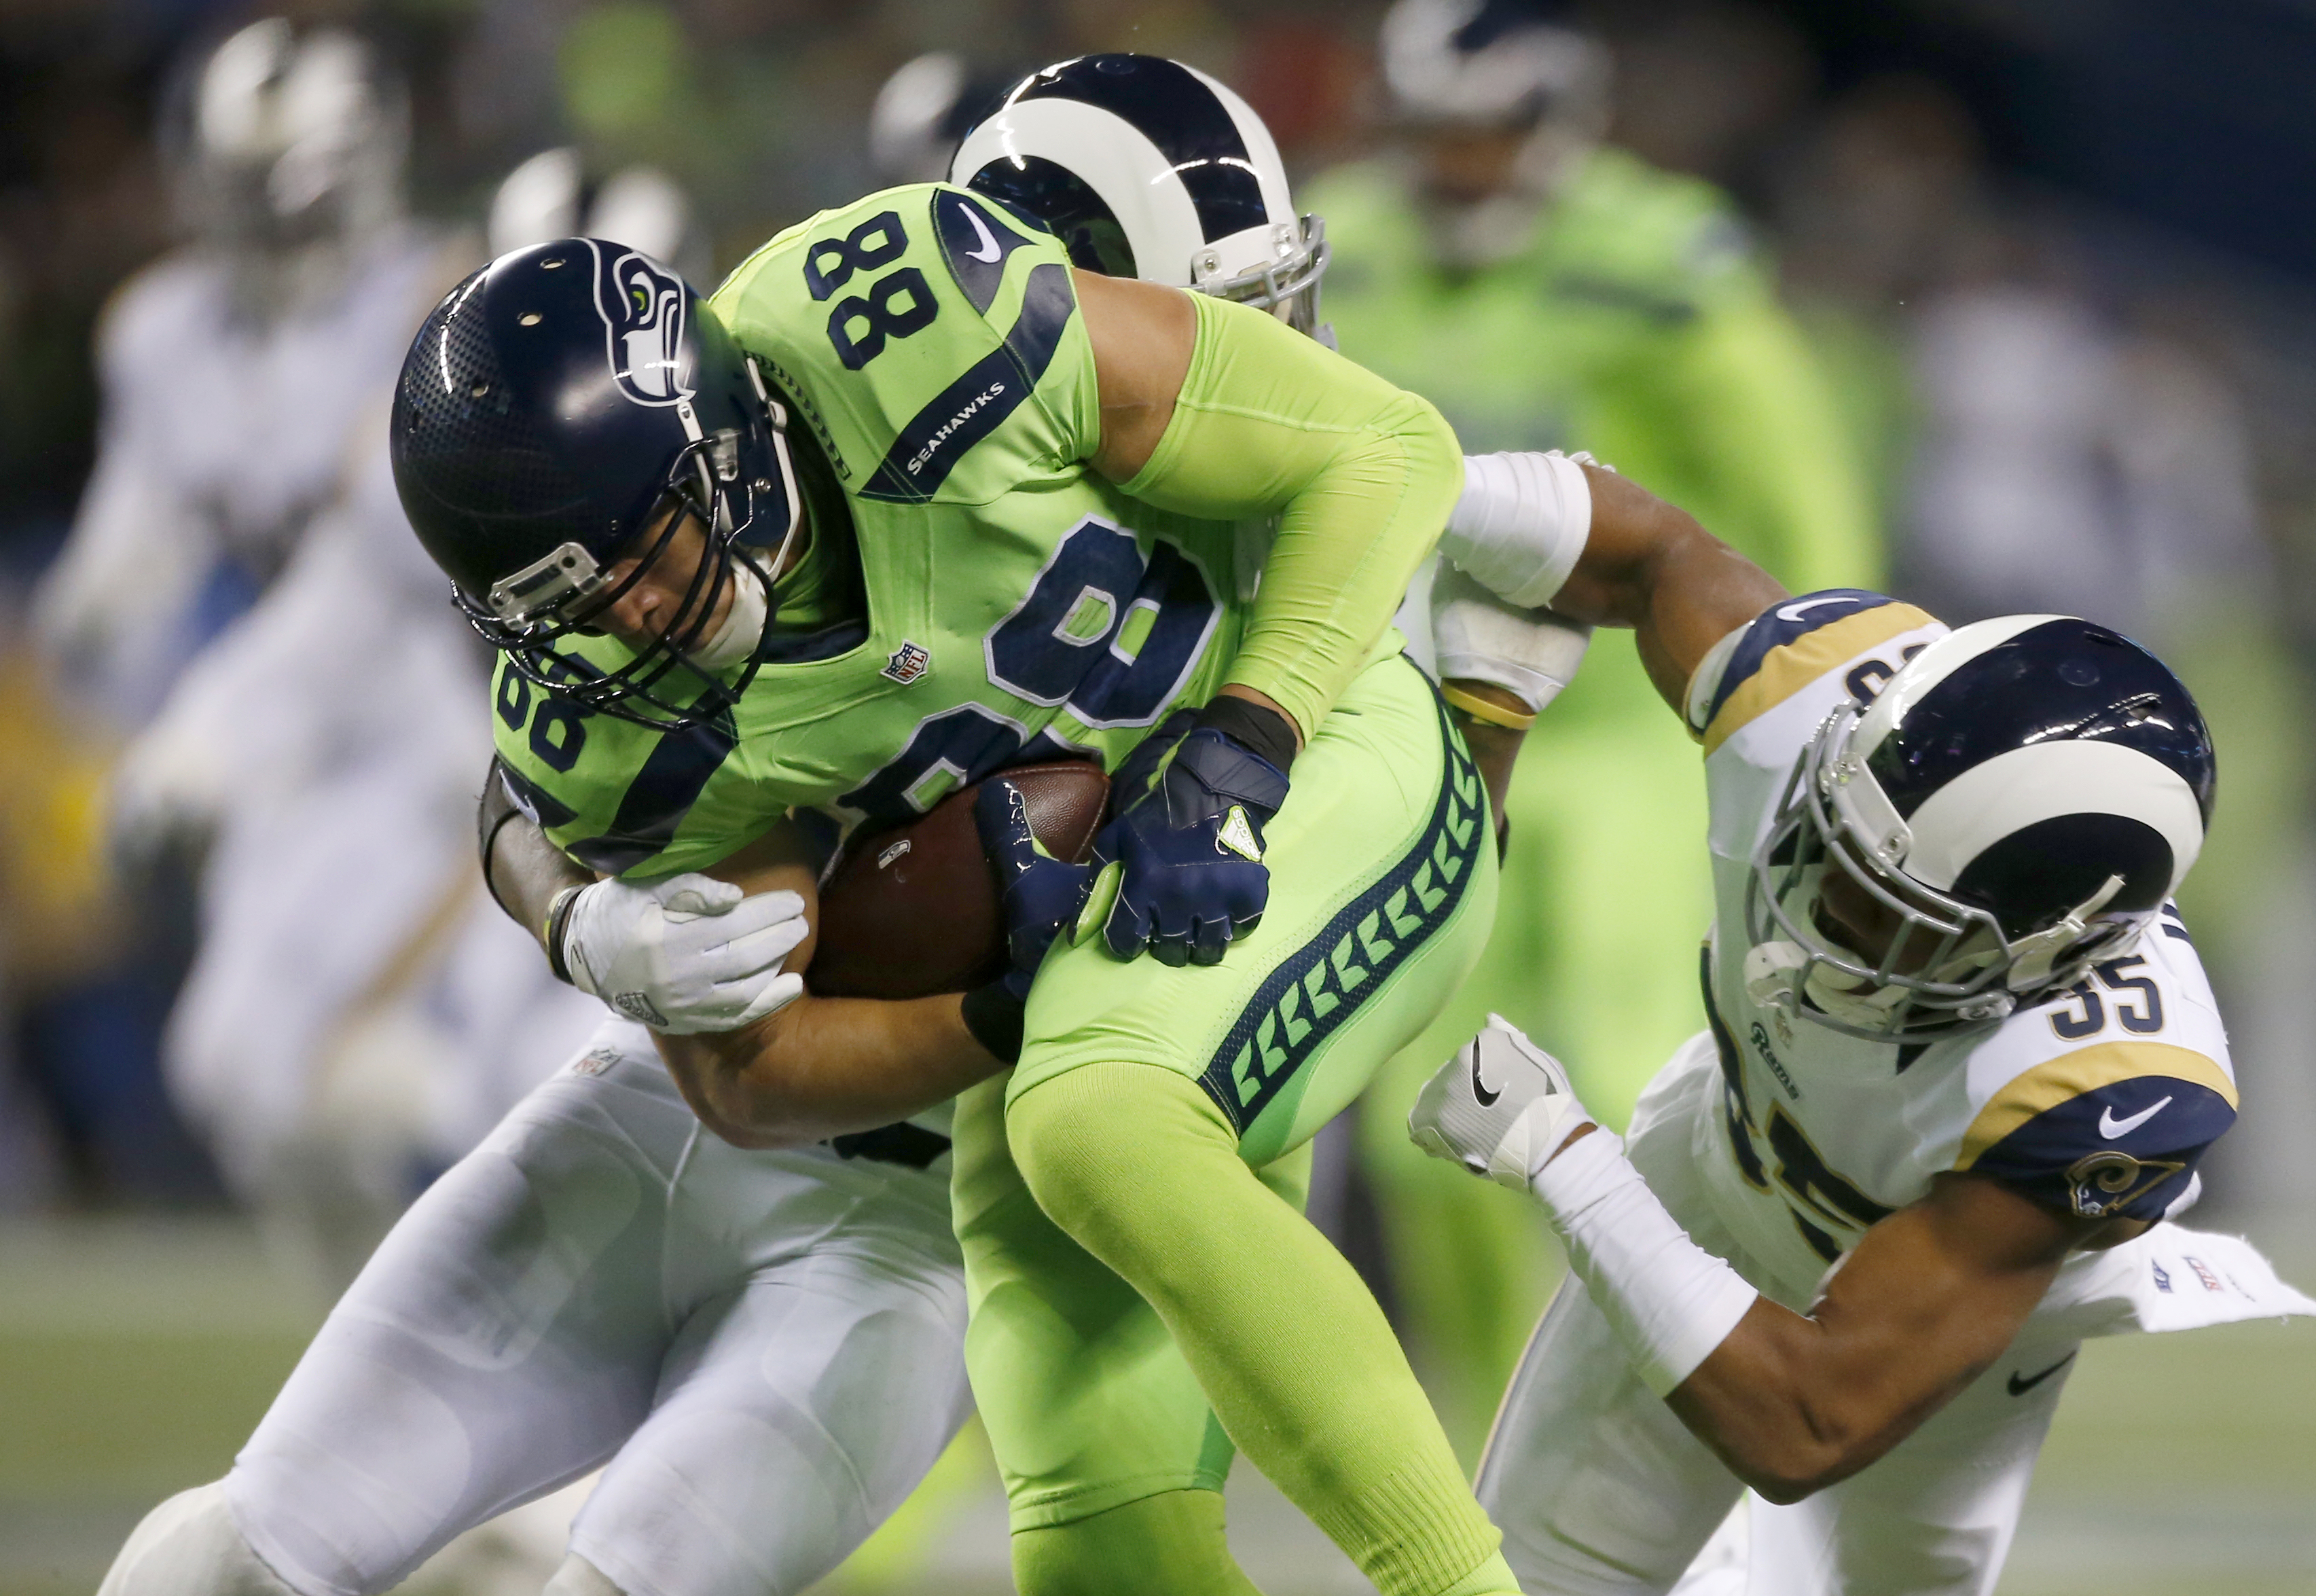 Vegas Play of the Day: Seahawks at Rams